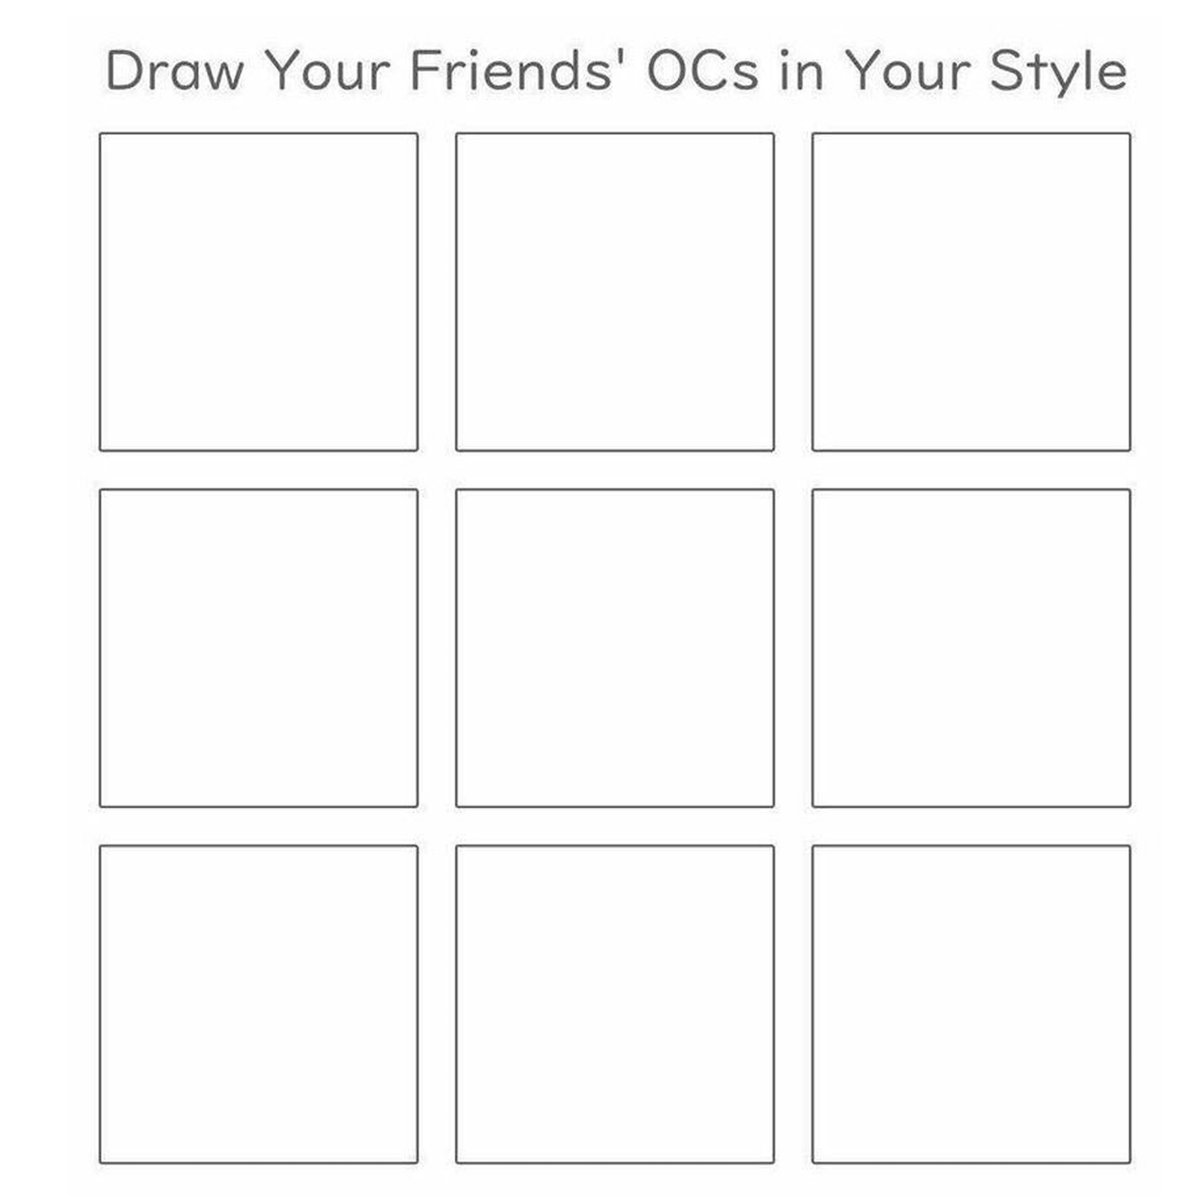 mutuals. your ocs. hand them over 